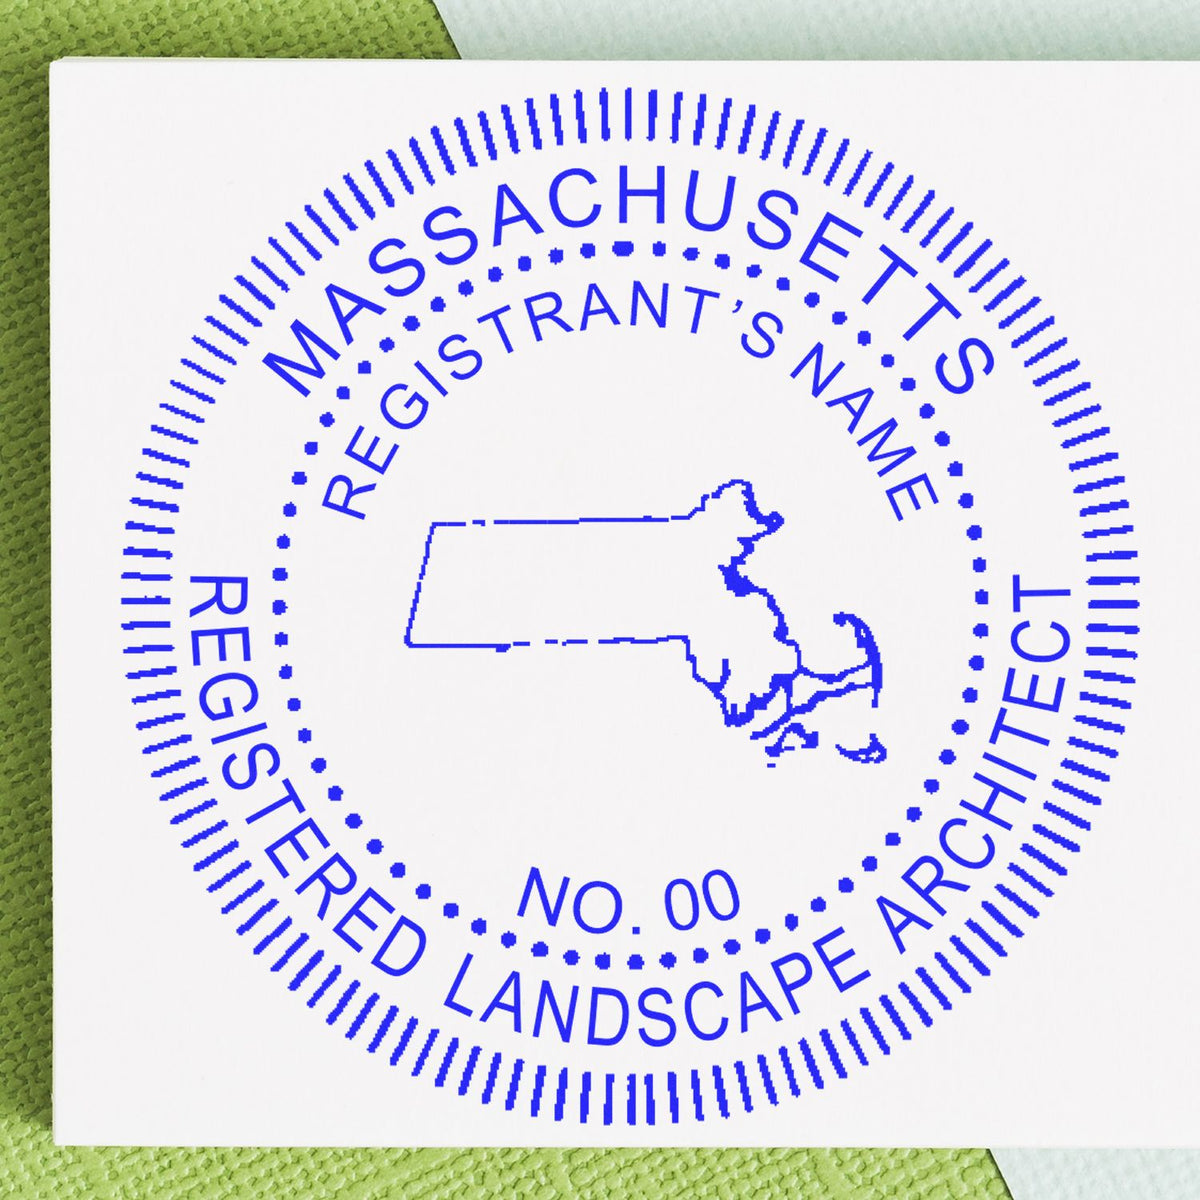 The Slim Pre-Inked Massachusetts Landscape Architect Seal Stamp stamp impression comes to life with a crisp, detailed photo on paper - showcasing true professional quality.